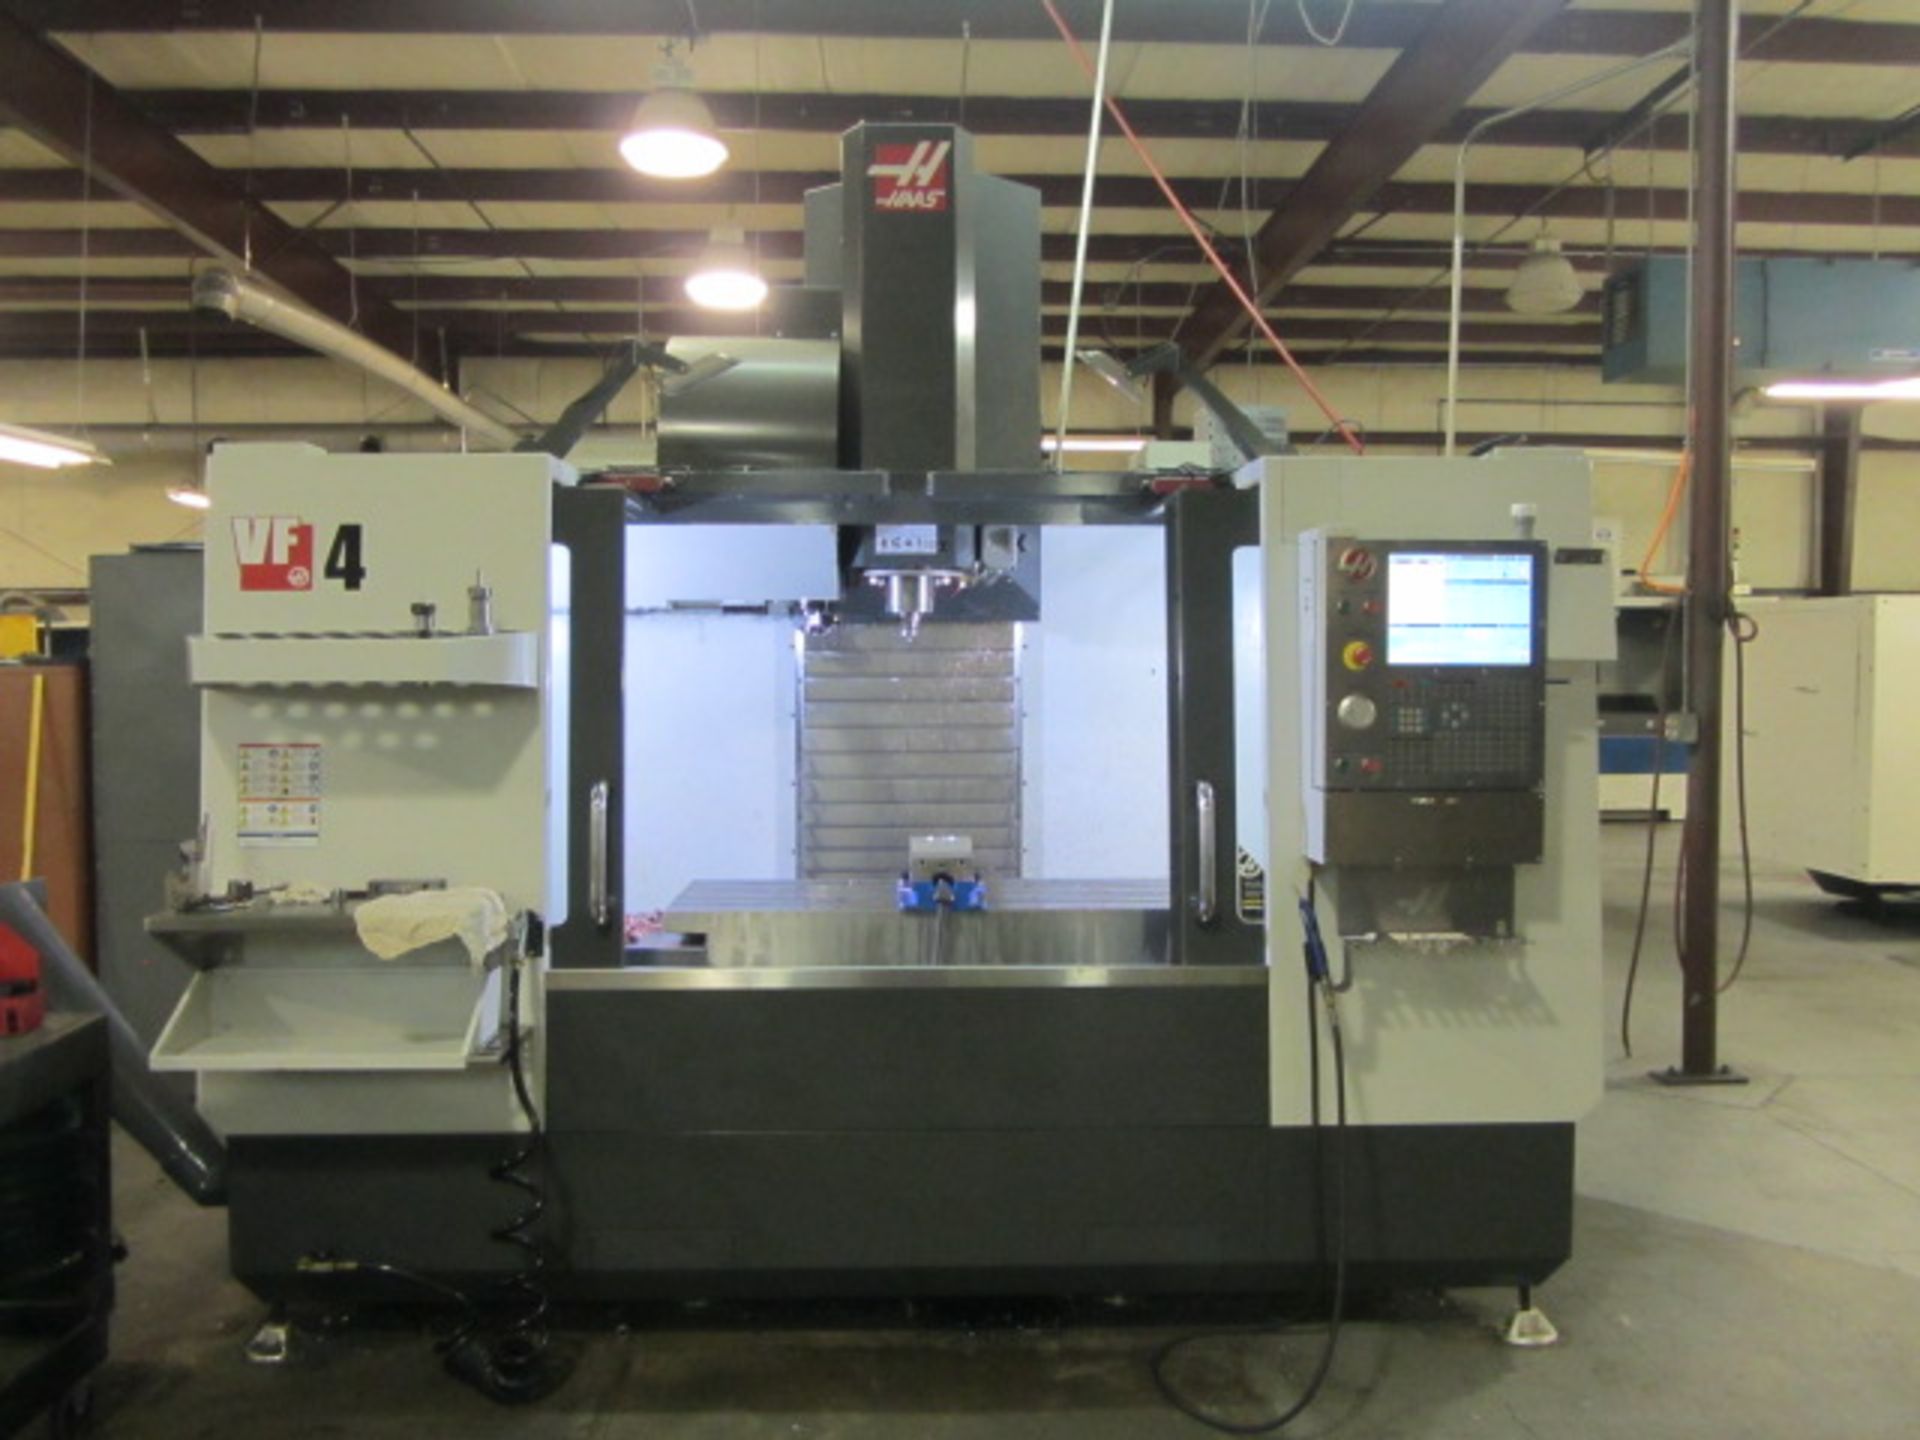 Haas VF-4 CNC Vertical Machining Center with 52'' x 20'' Table, #40 Taper Spindle Speeds to 8100 - Image 4 of 8